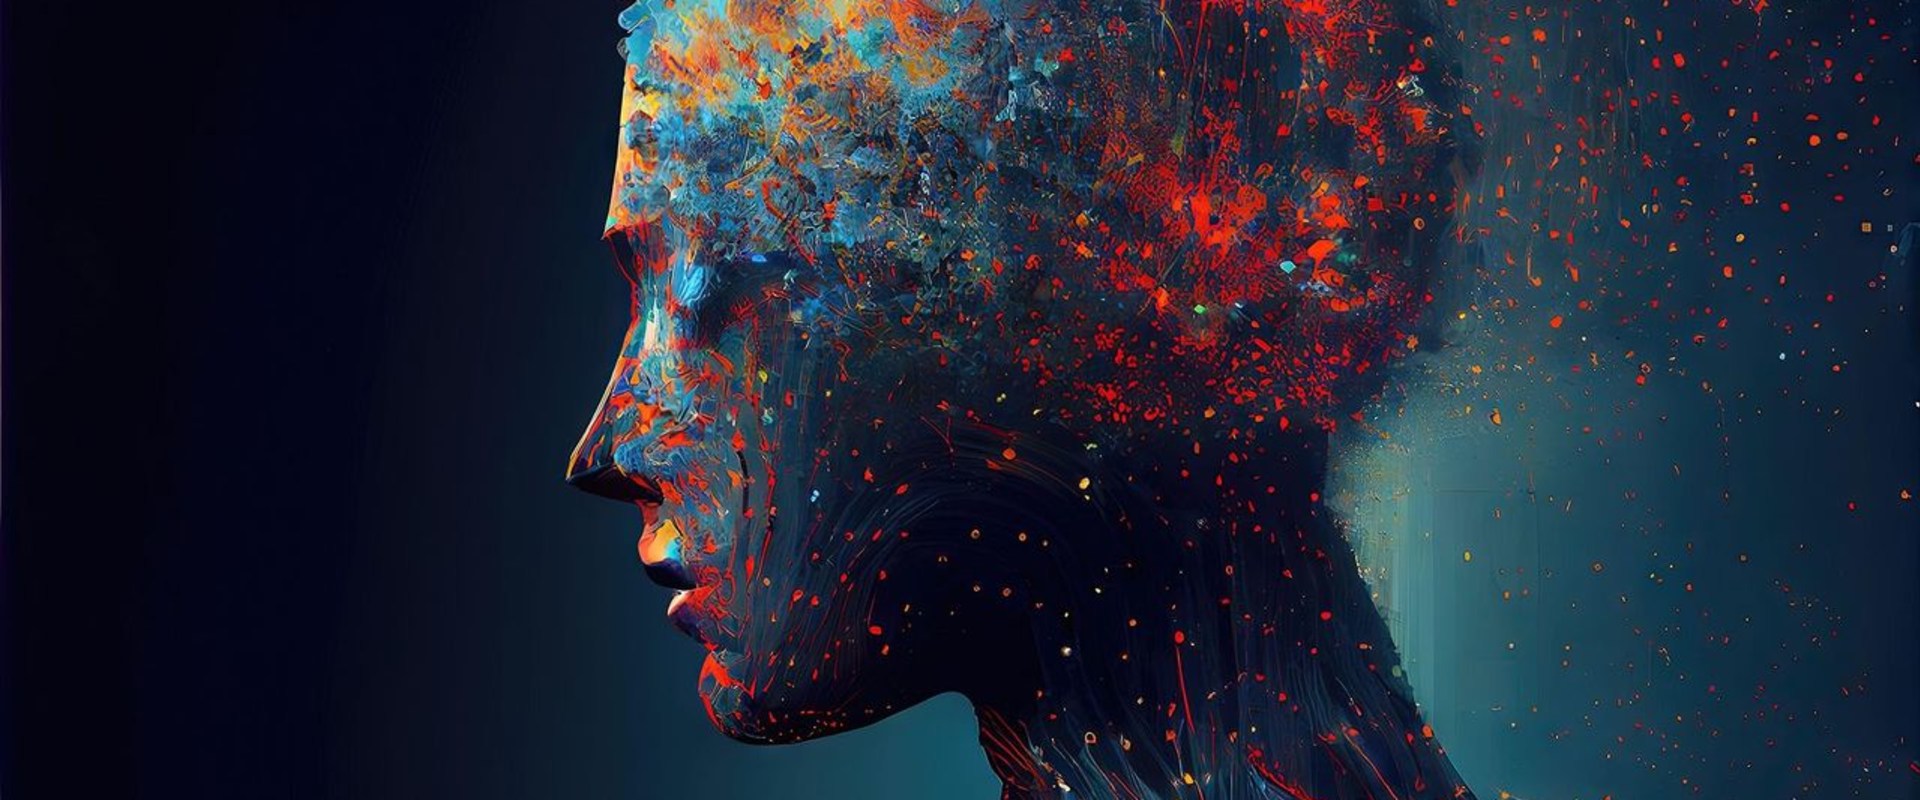 How does the future of artificial intelligence impact human kind?